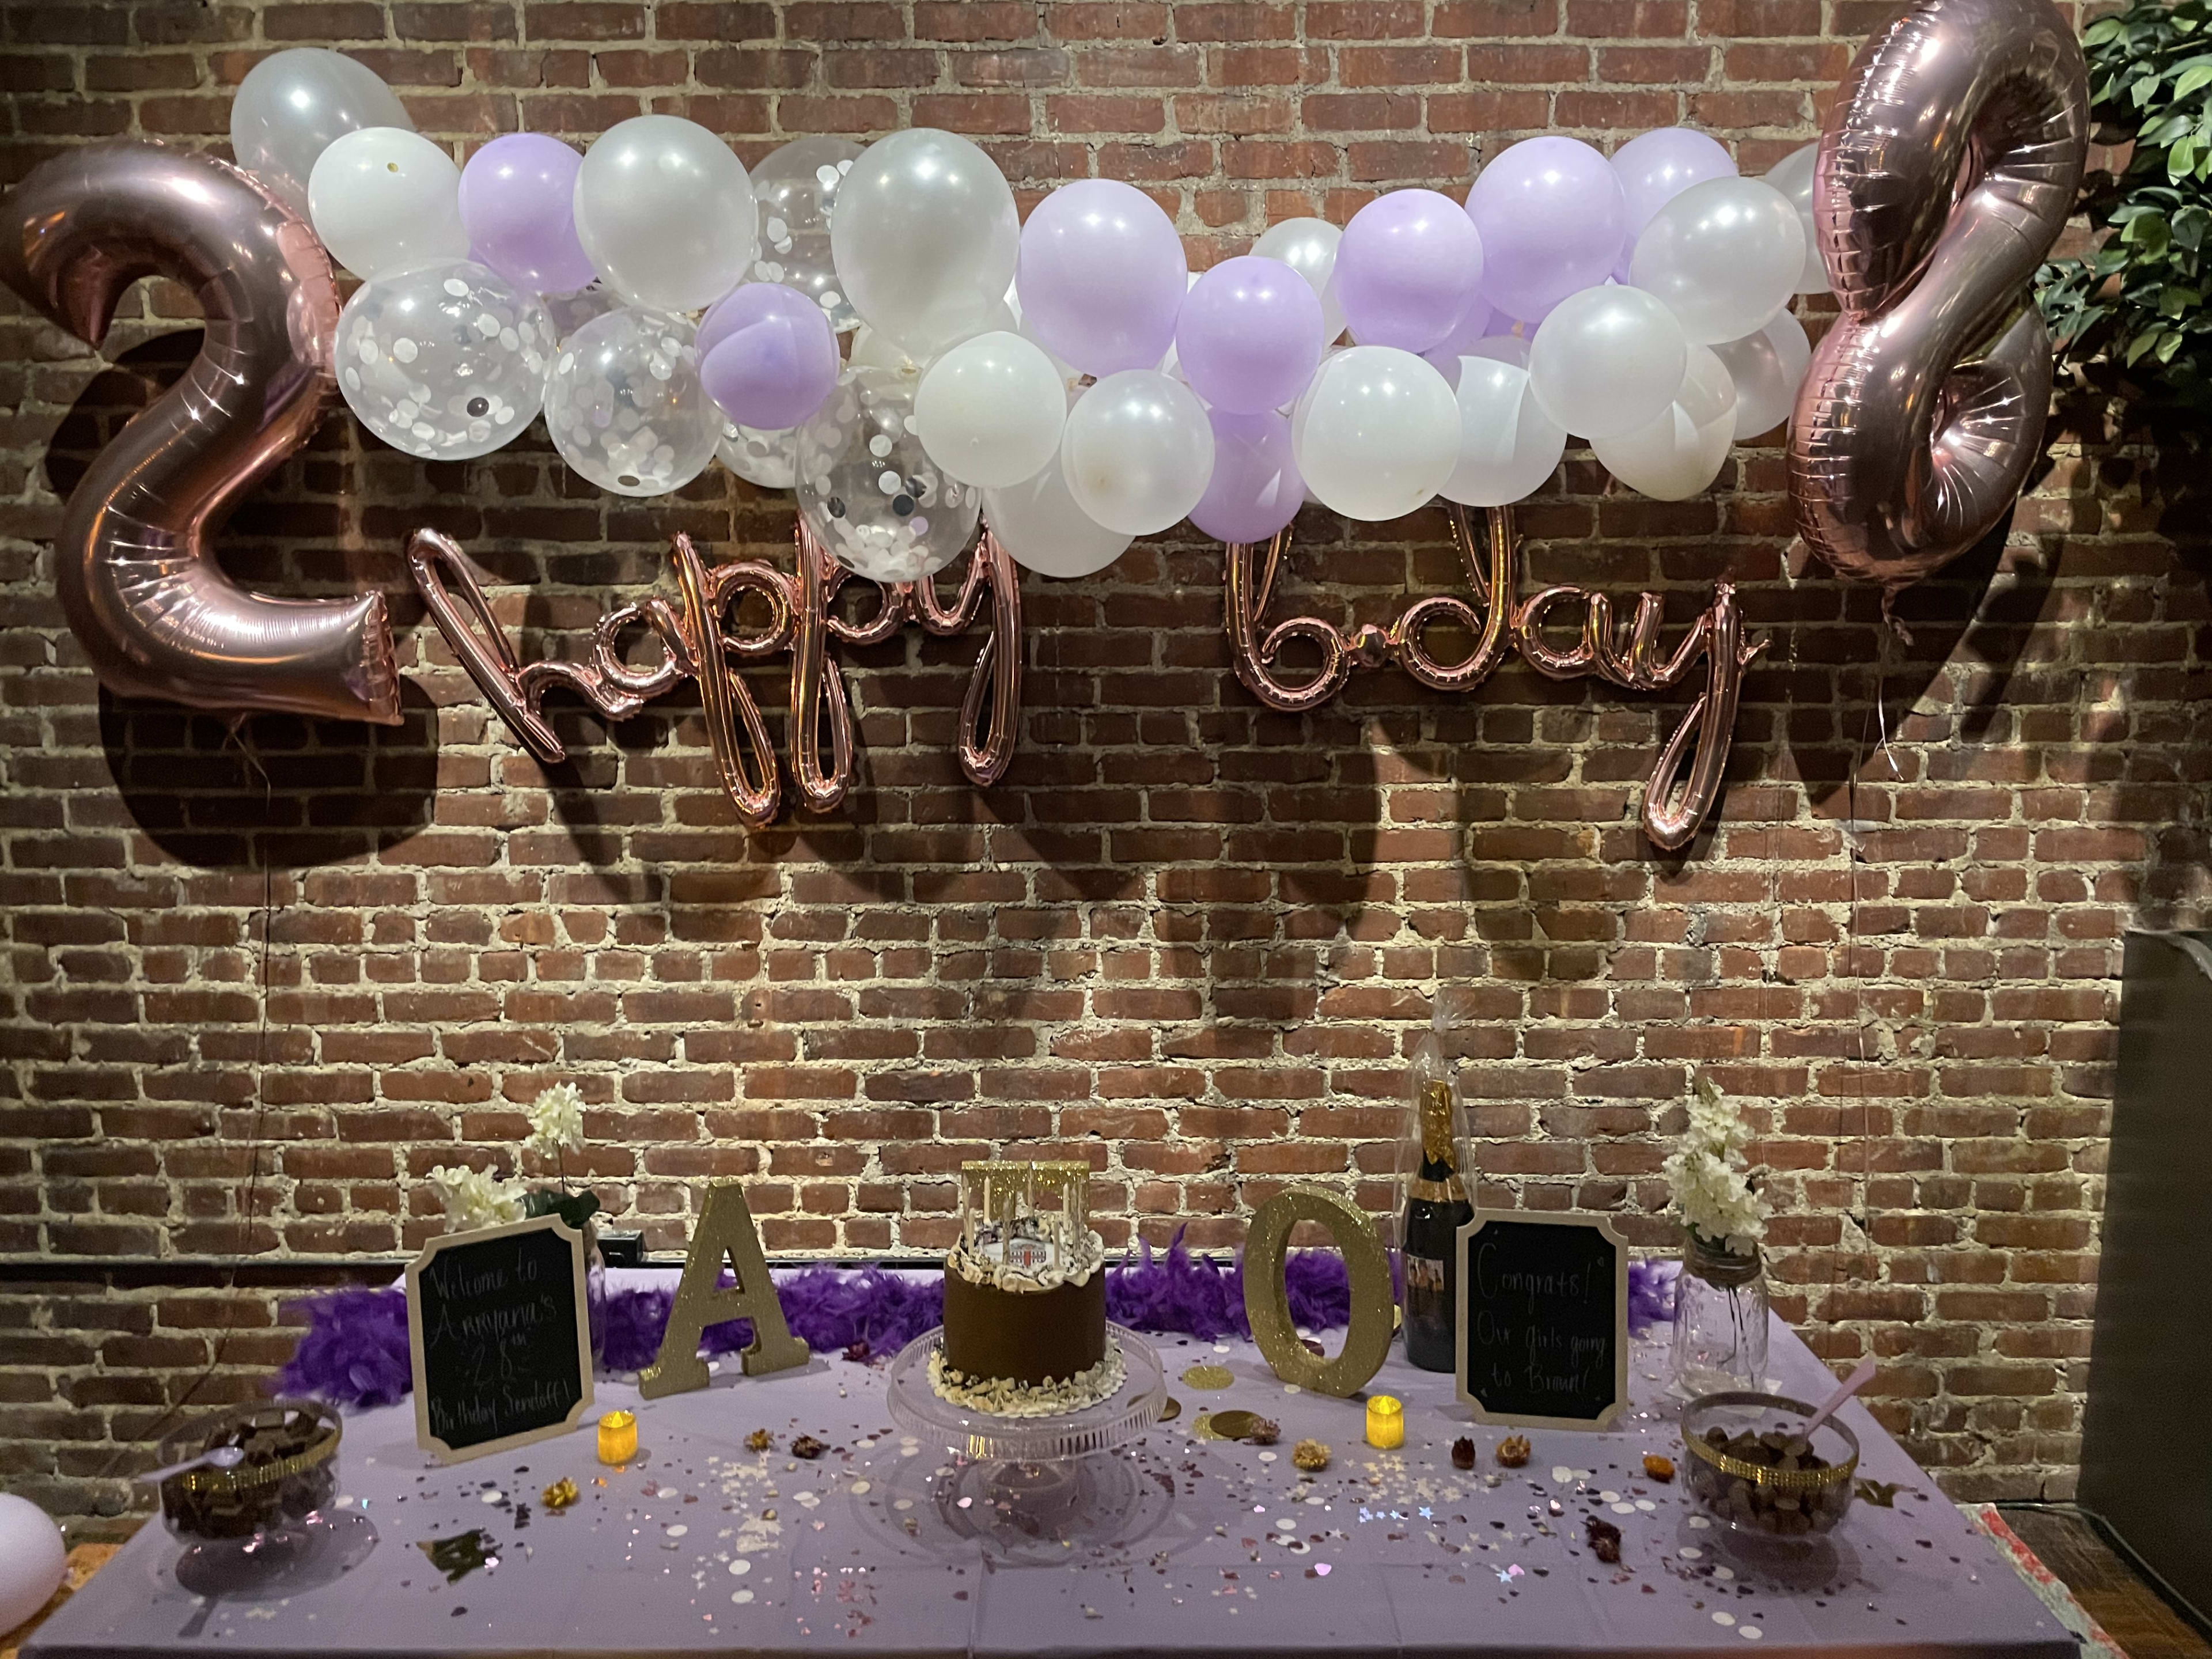 A birthday party table with a cake and purple and white balloons.